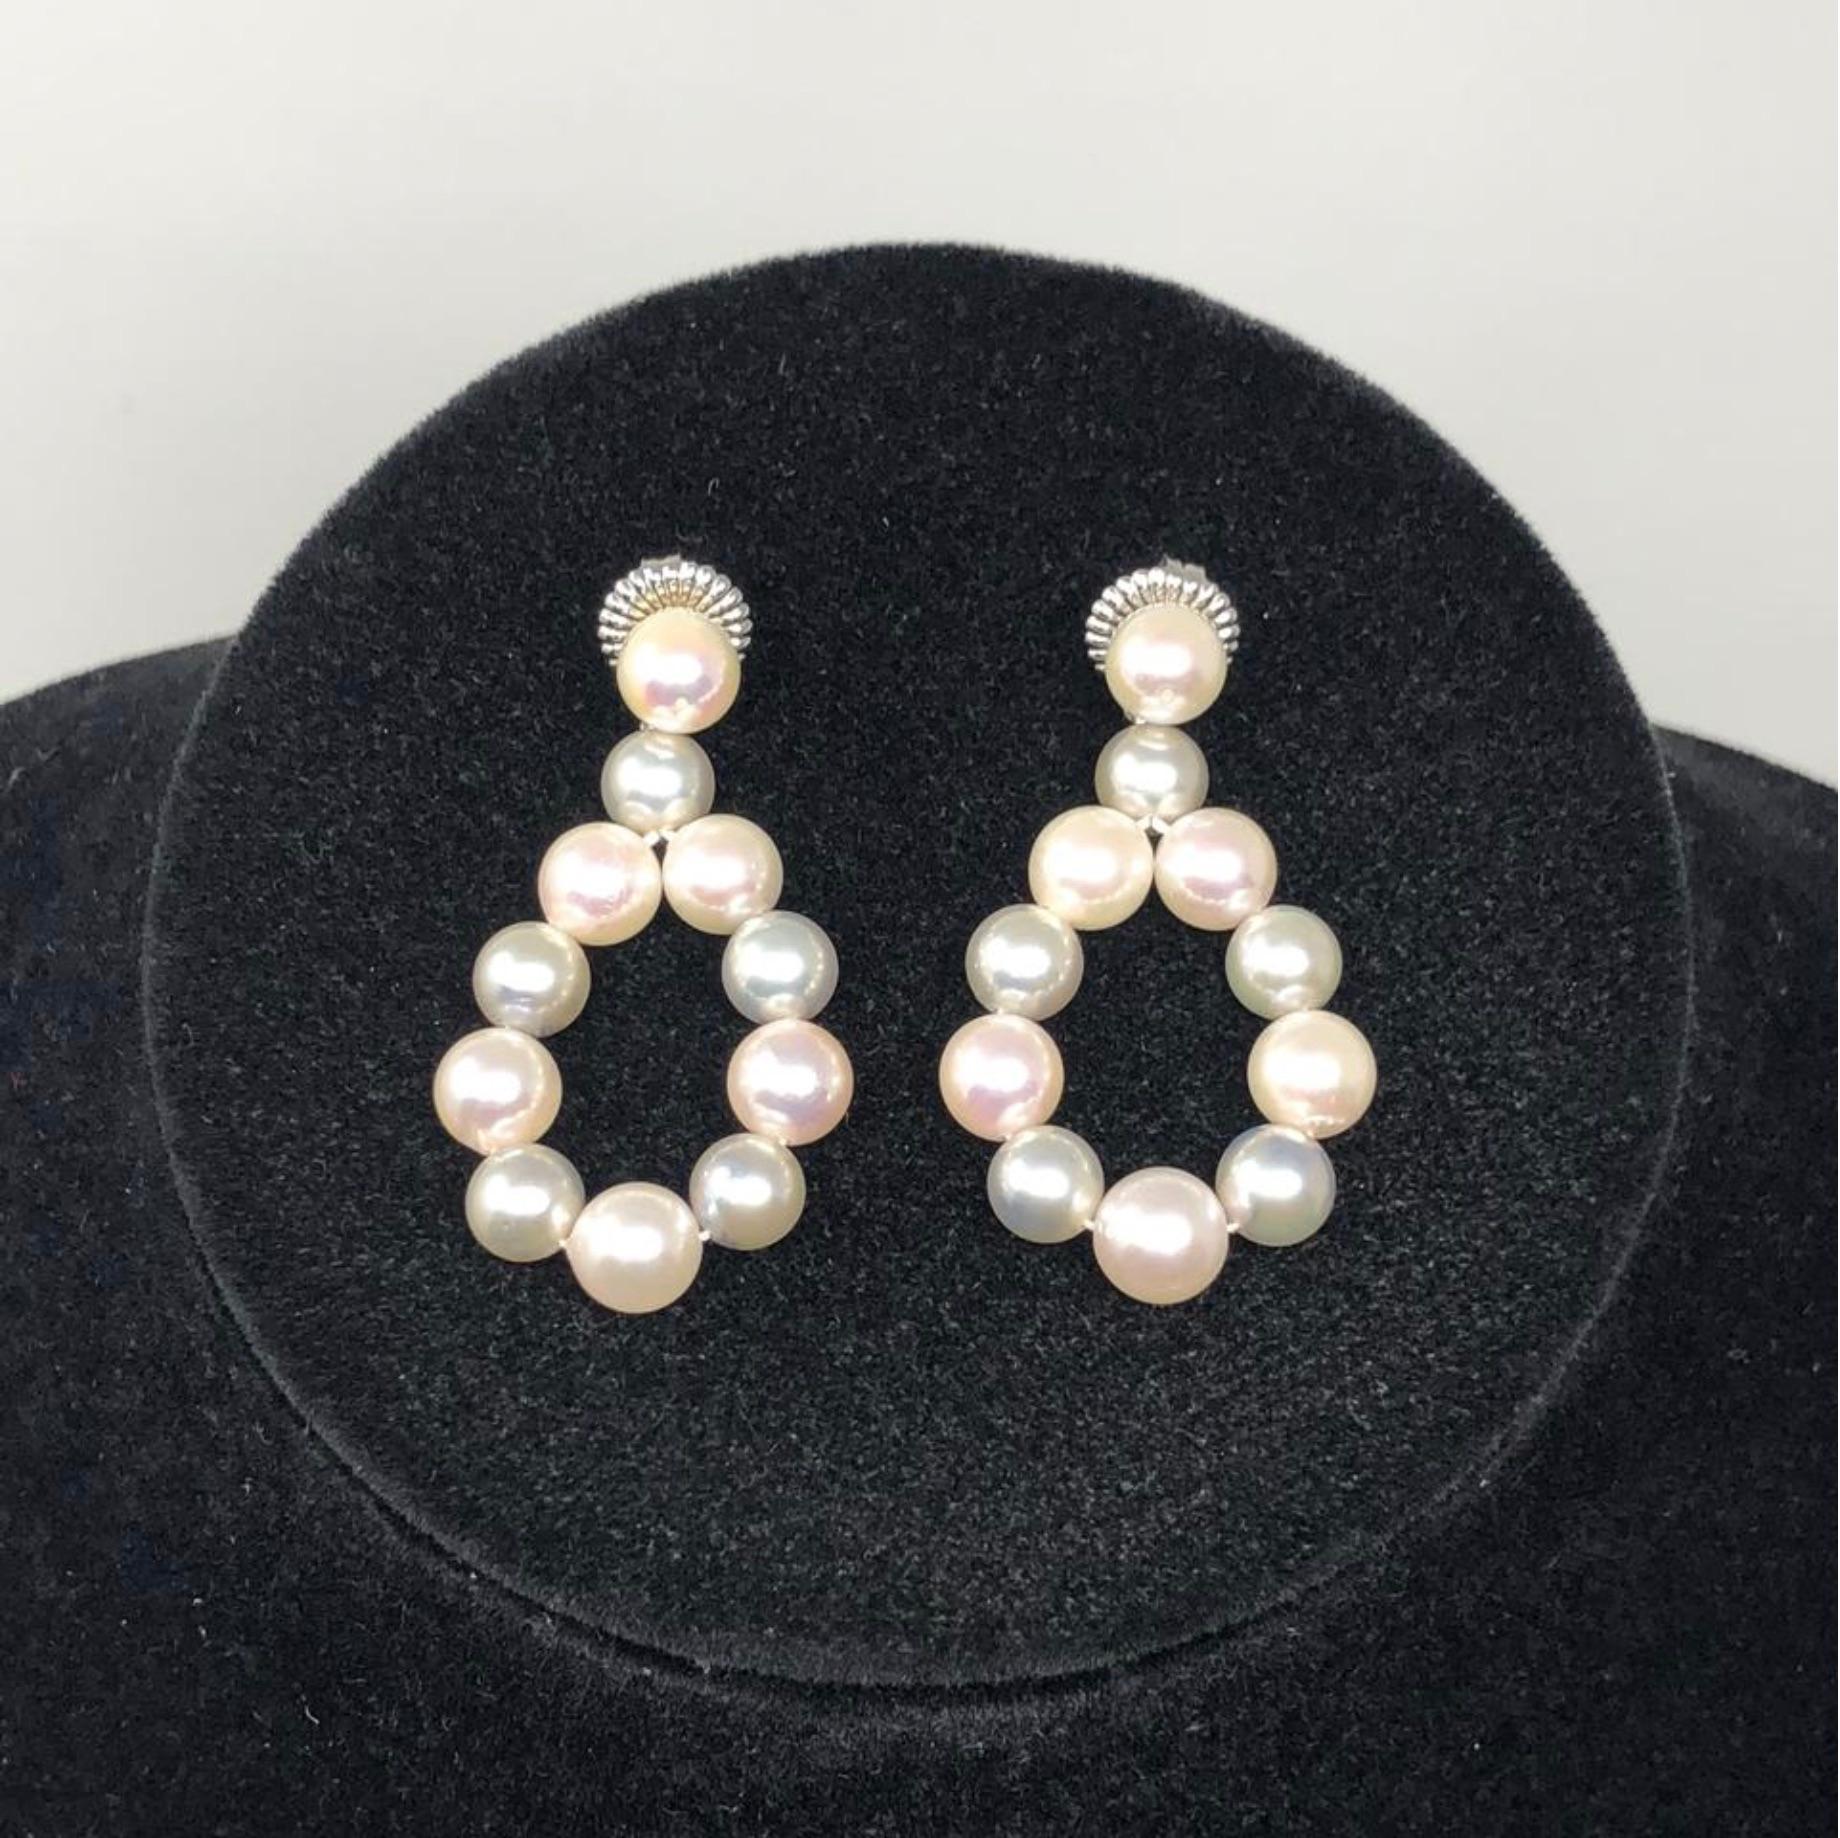 MODEL - Beijing Pearl Market Custom Hanging Loop Grey and White Pearl Earrings 

CONDITION - Exceptional! No signs of wear.

SKU - 2346-FL

ORIGINAL RETAIL PRICE - 350 + tax

MATERIAL - Pearl

WEIGHT - NA

DIMENSIONS - L4-5mm x H4-5mm x D4-5mm (1.5